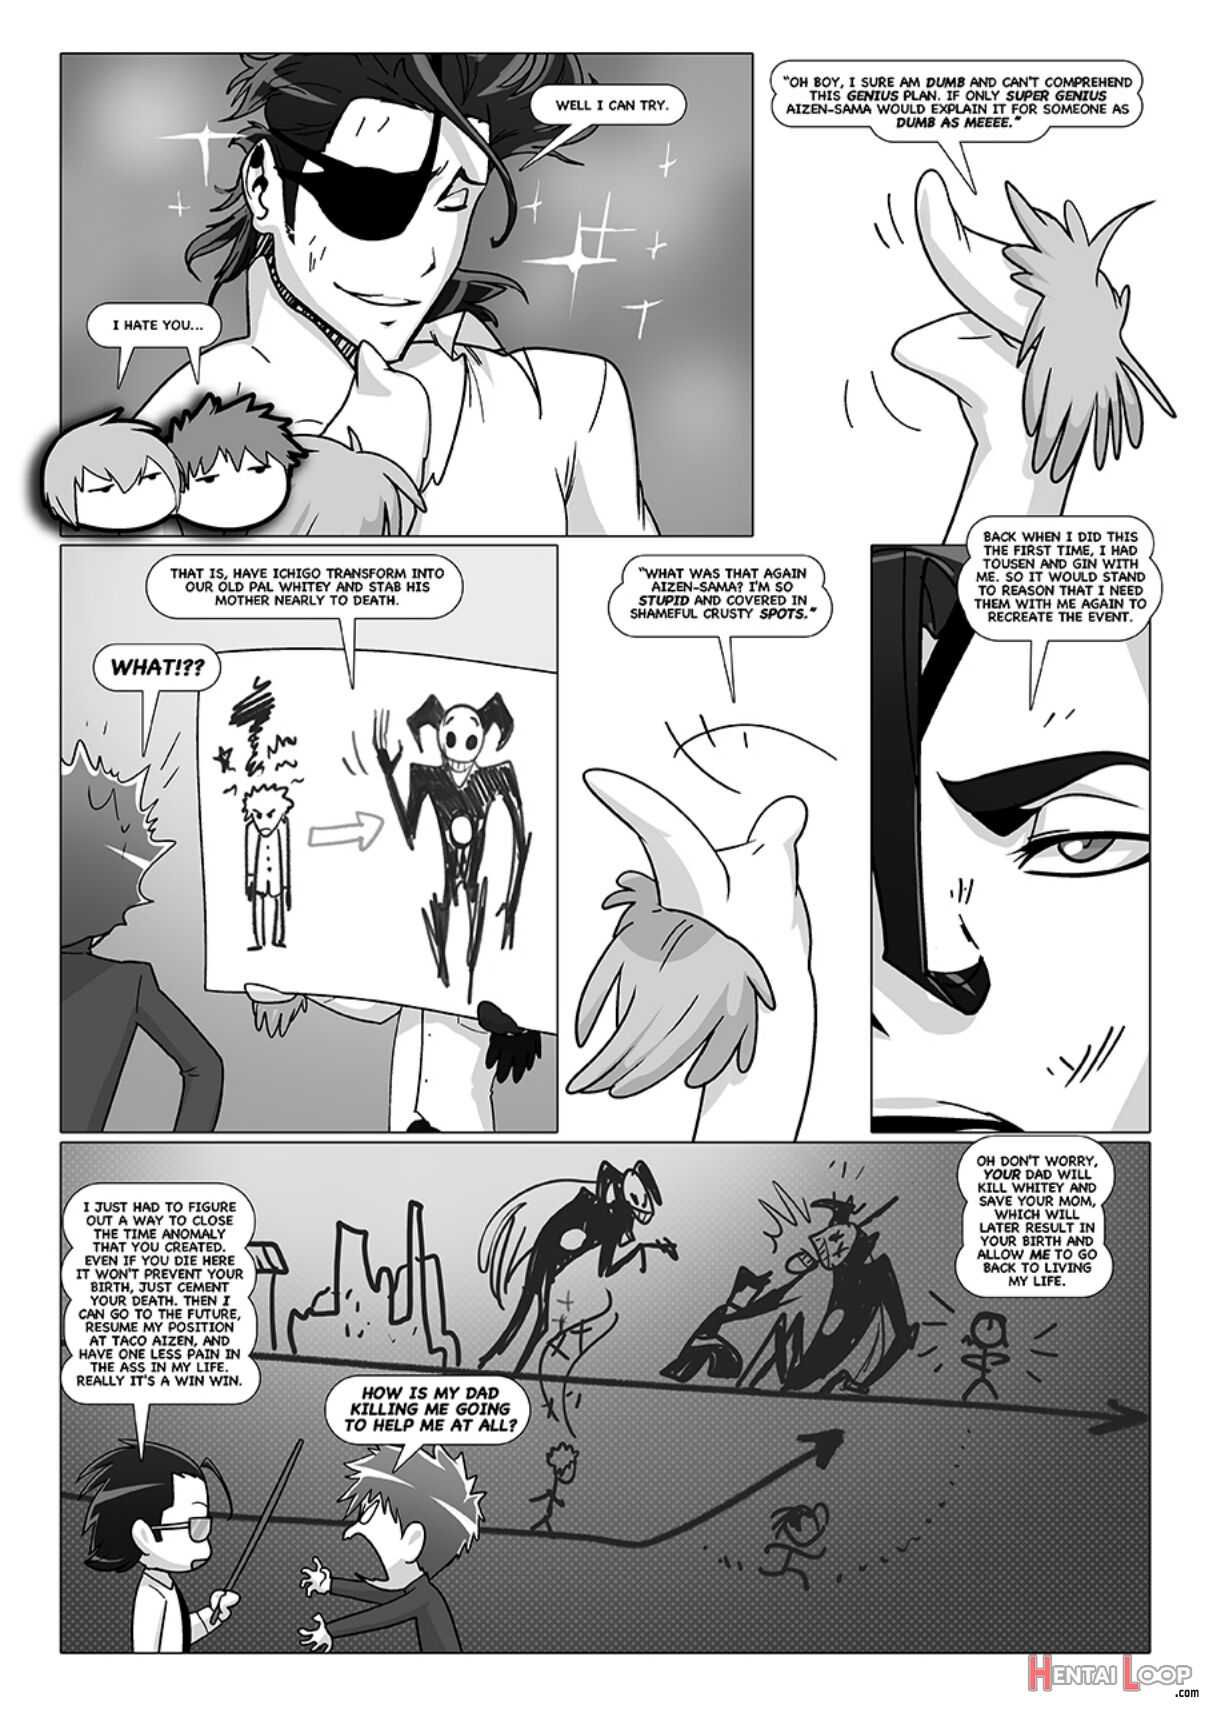 Happy To Serve You - Xxx Version page 456